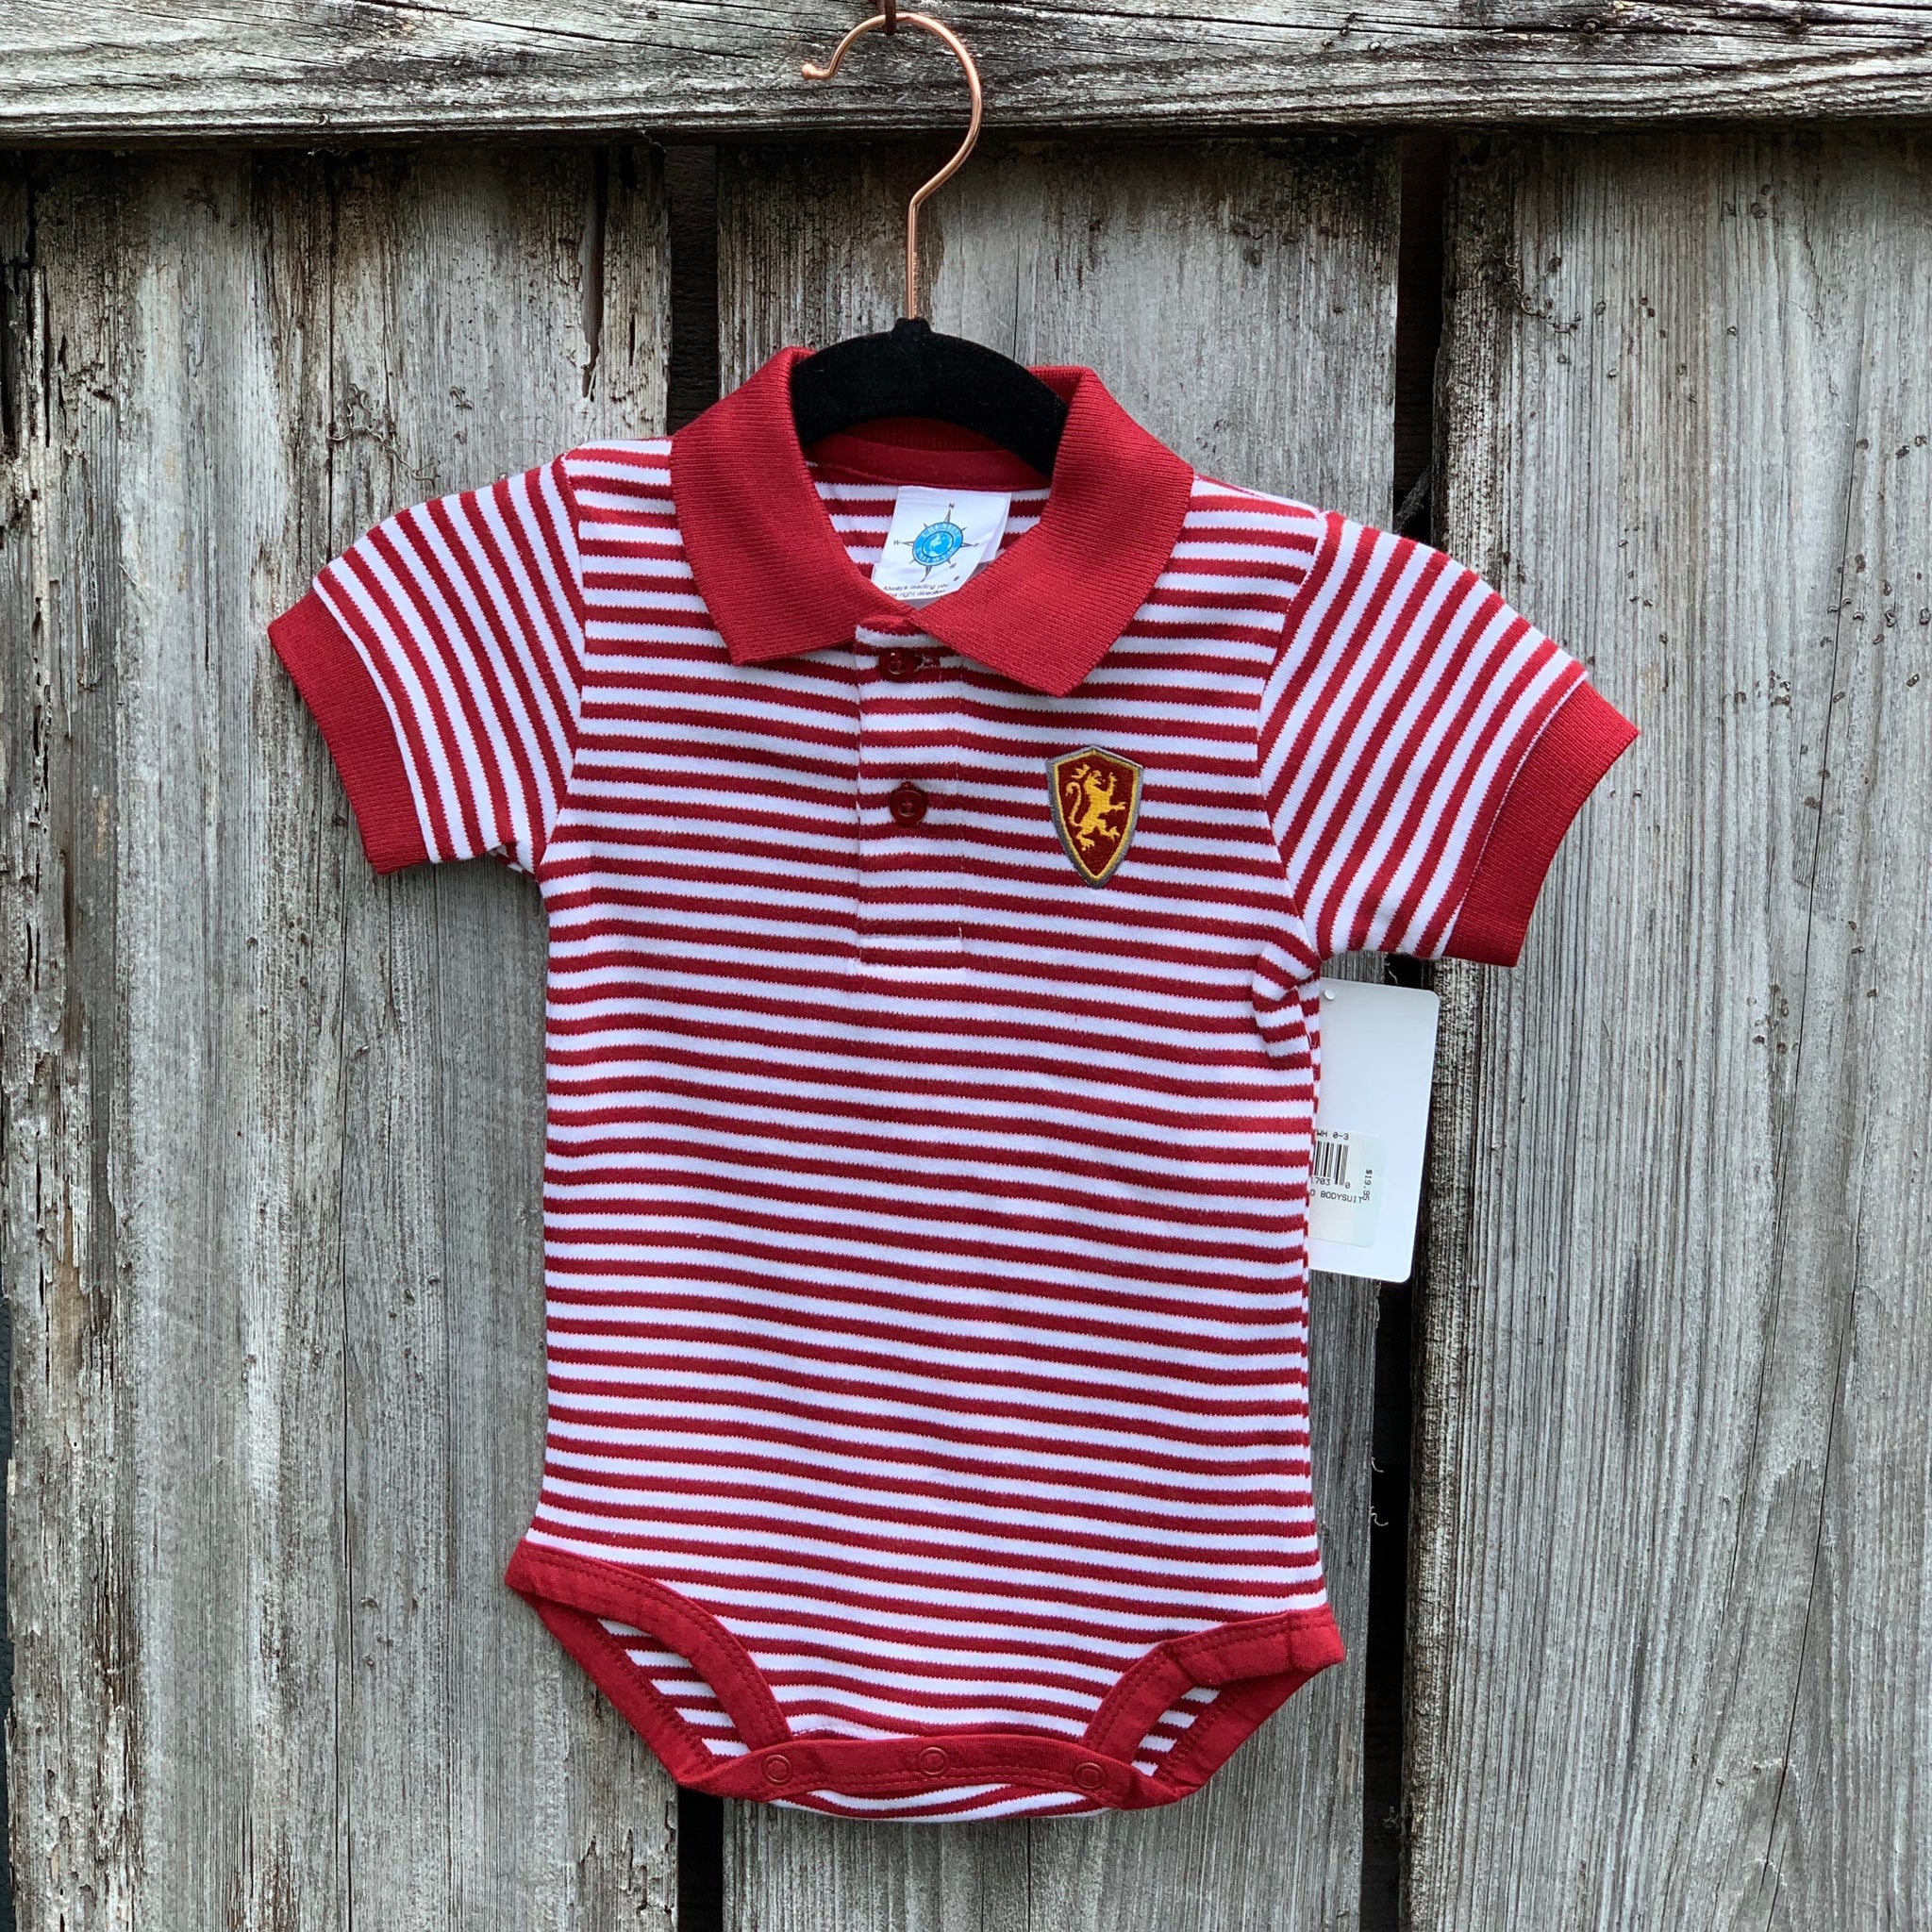 Baby onesie with polo cut. crimson and white stripes and Flagler College shield logo on left chest